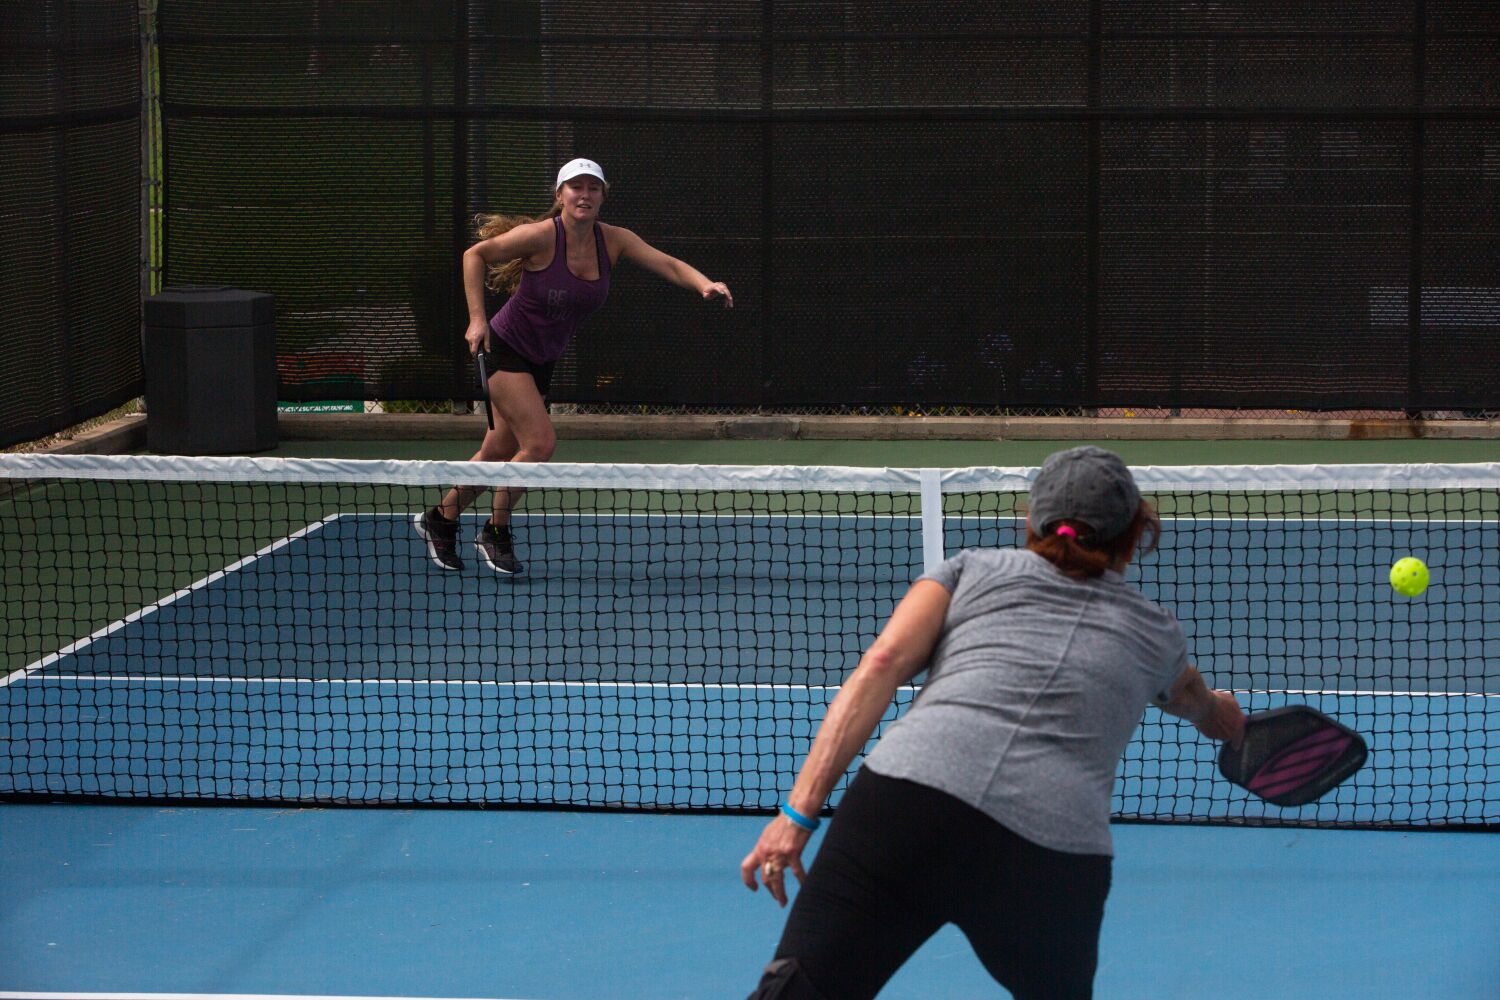 Caught in a pickle? The 'Airbnb of pickleball' can help L.A. players find a court